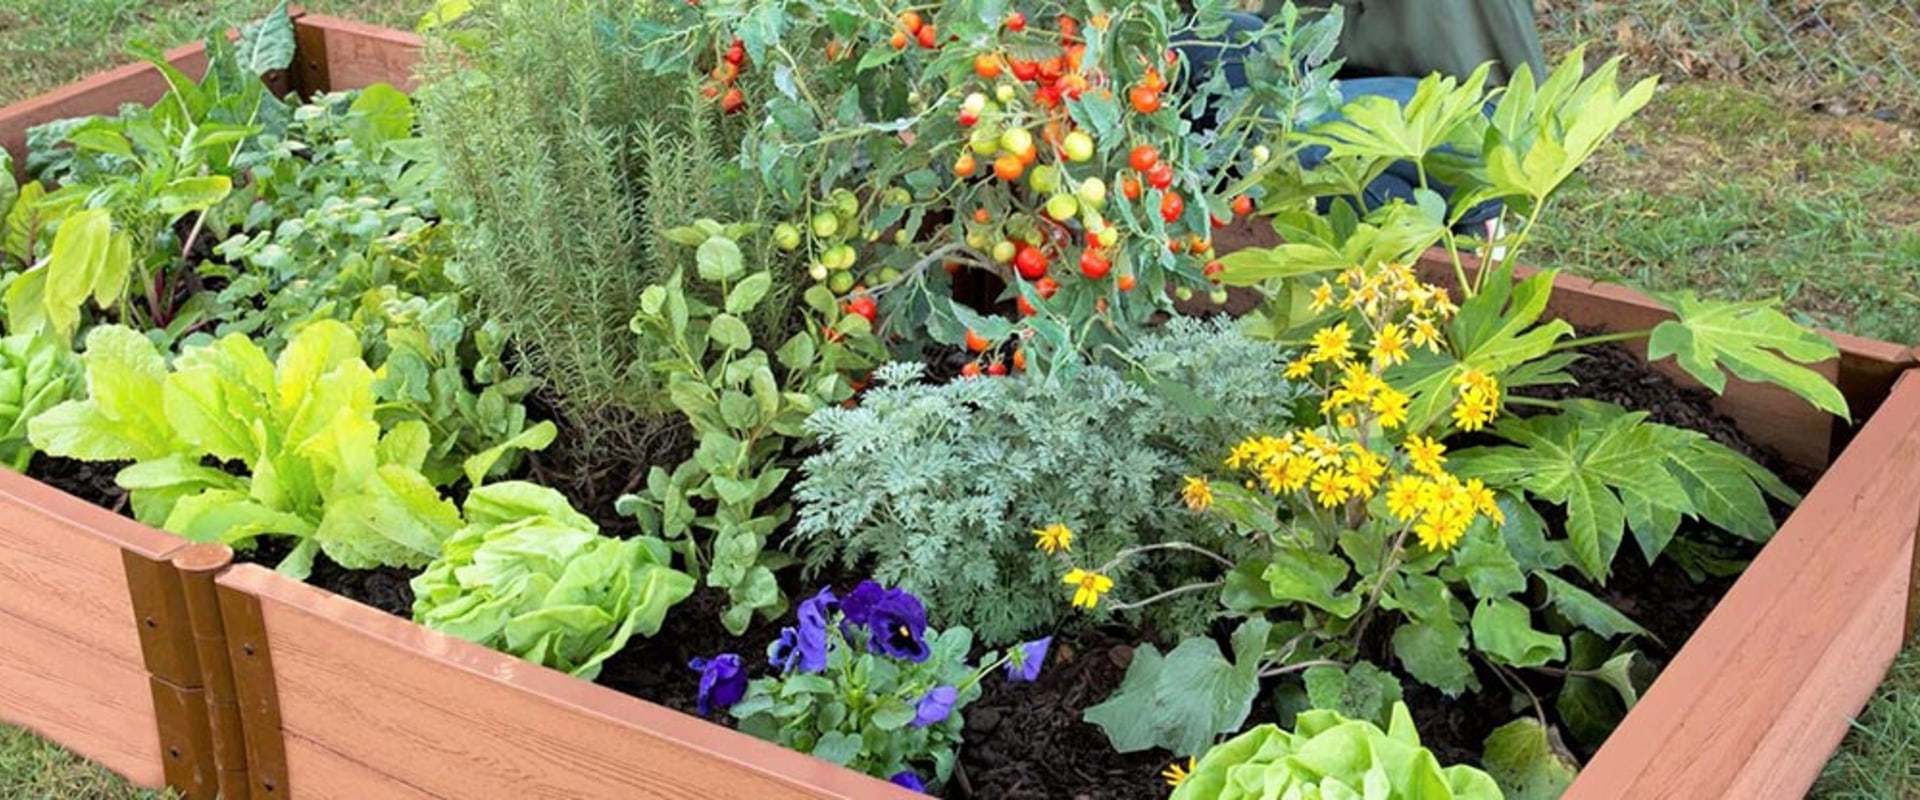 Tips for Maintaining Your Garden During the Growing Season